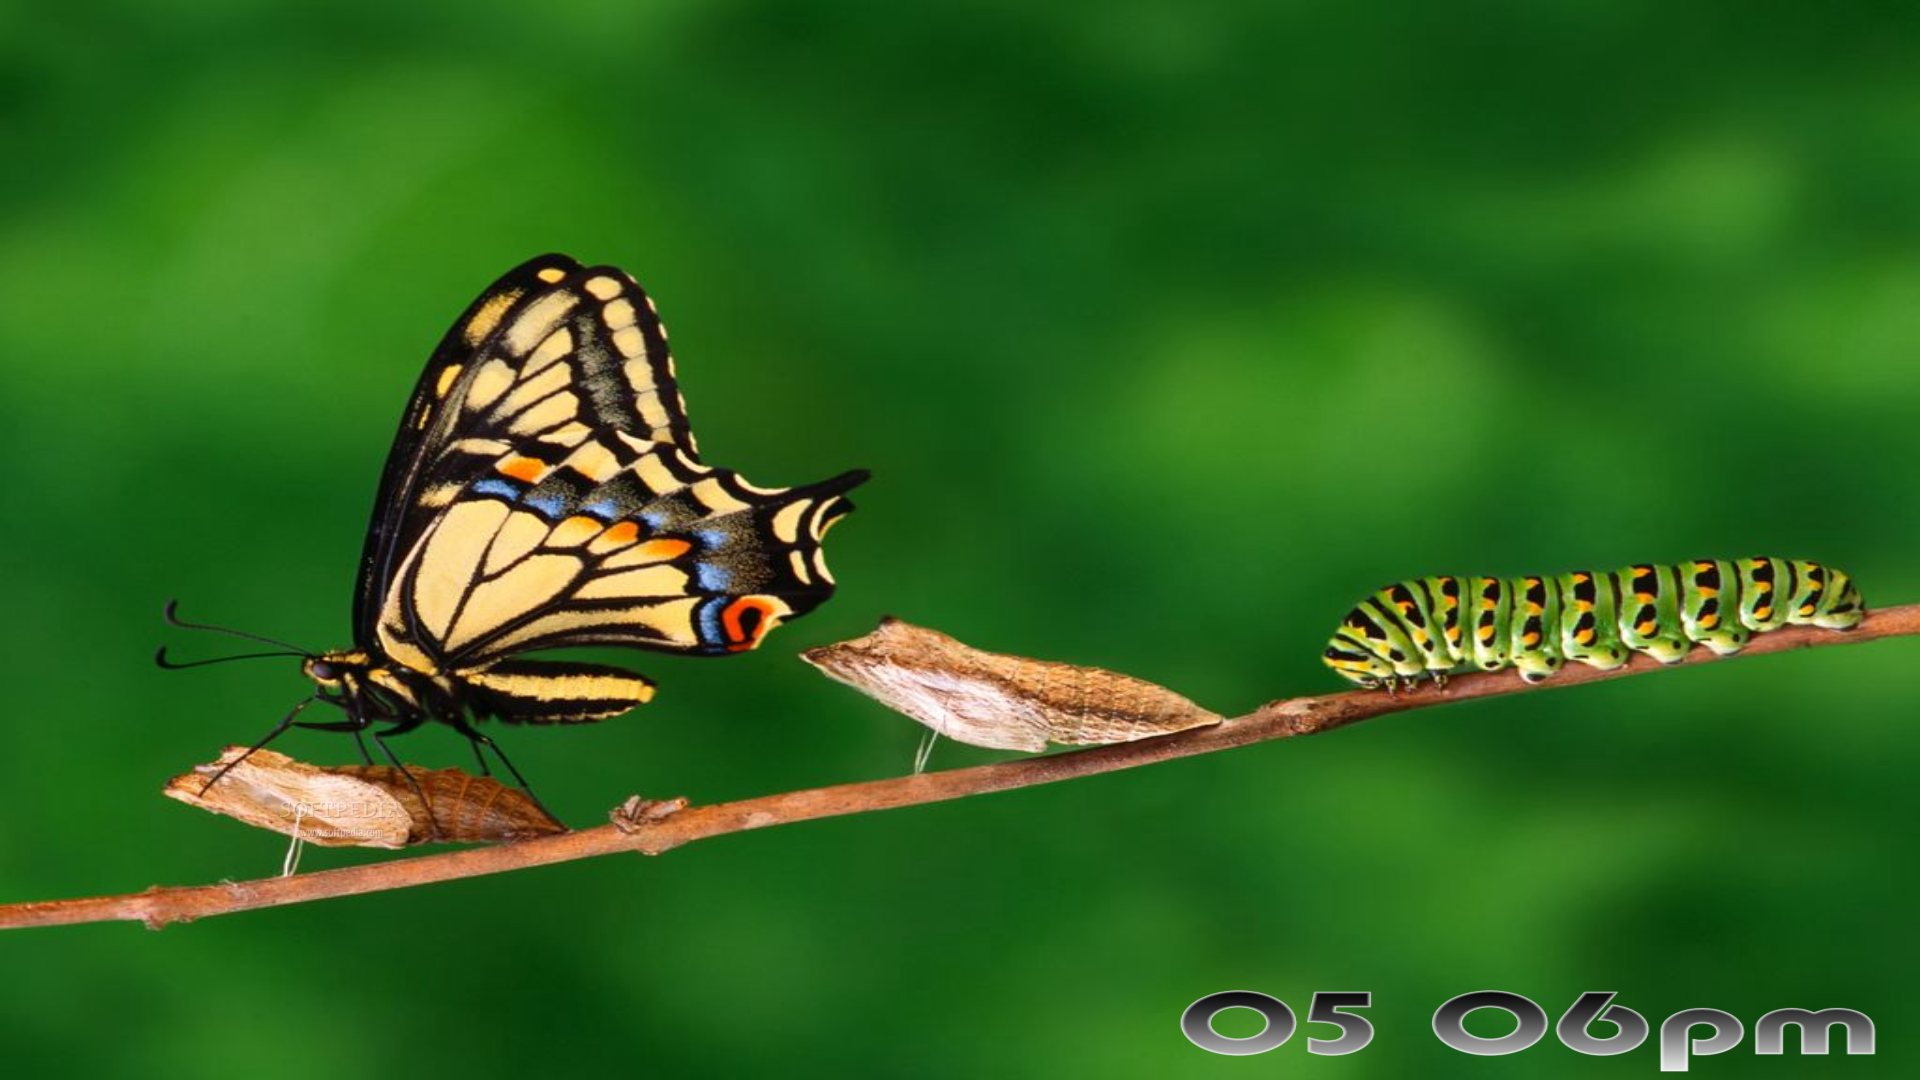  Free Pictures Images and Photos Free Butterflies Screensavers Desktop